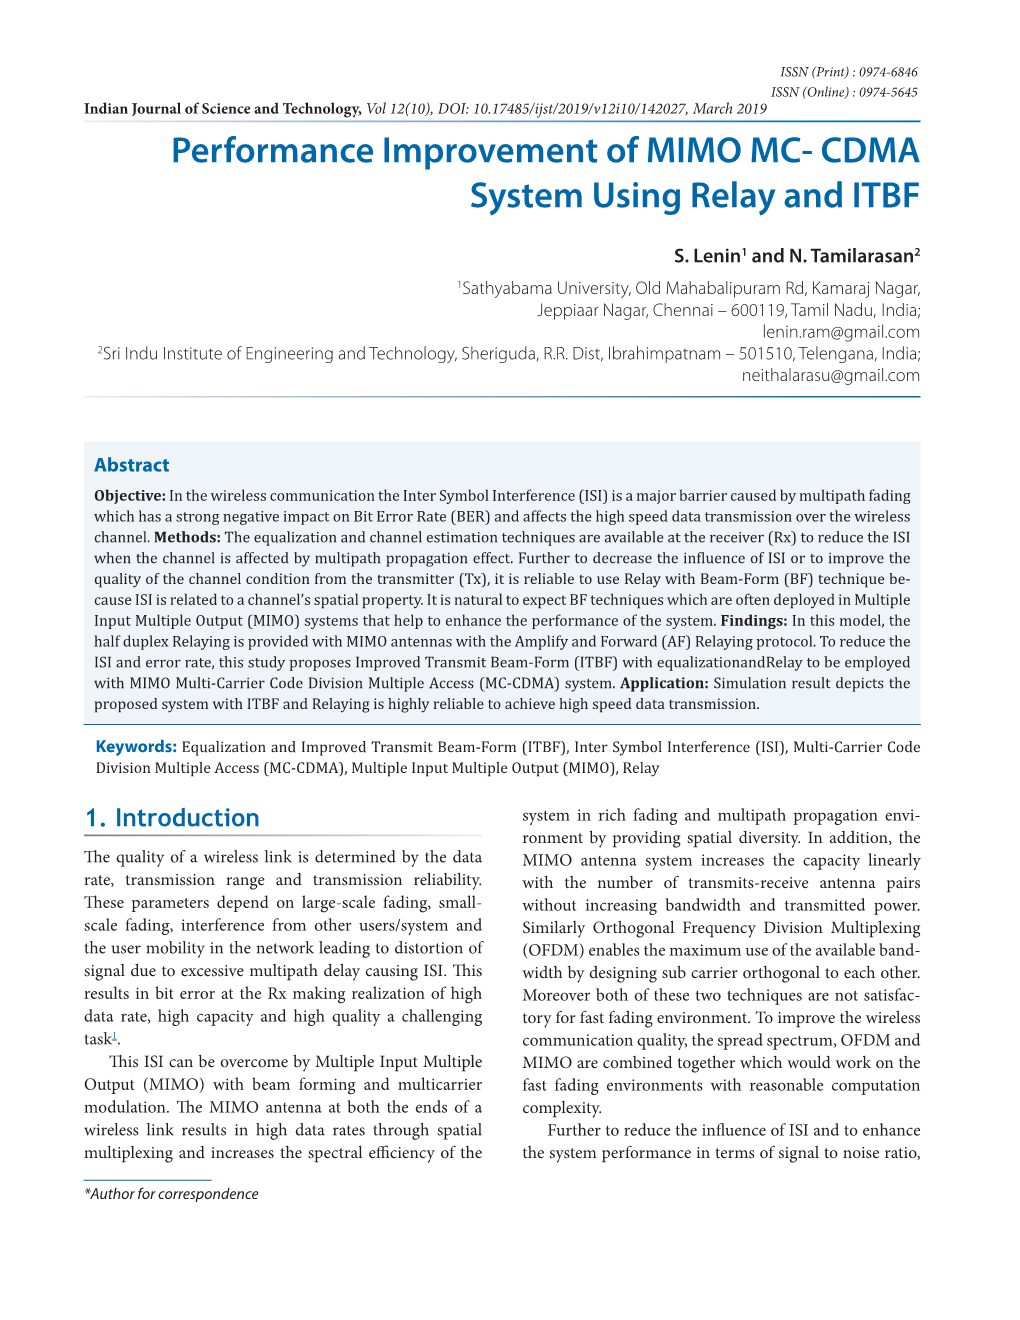 Performance Improvement of MIMO MC- CDMA System Using Relay and ITBF